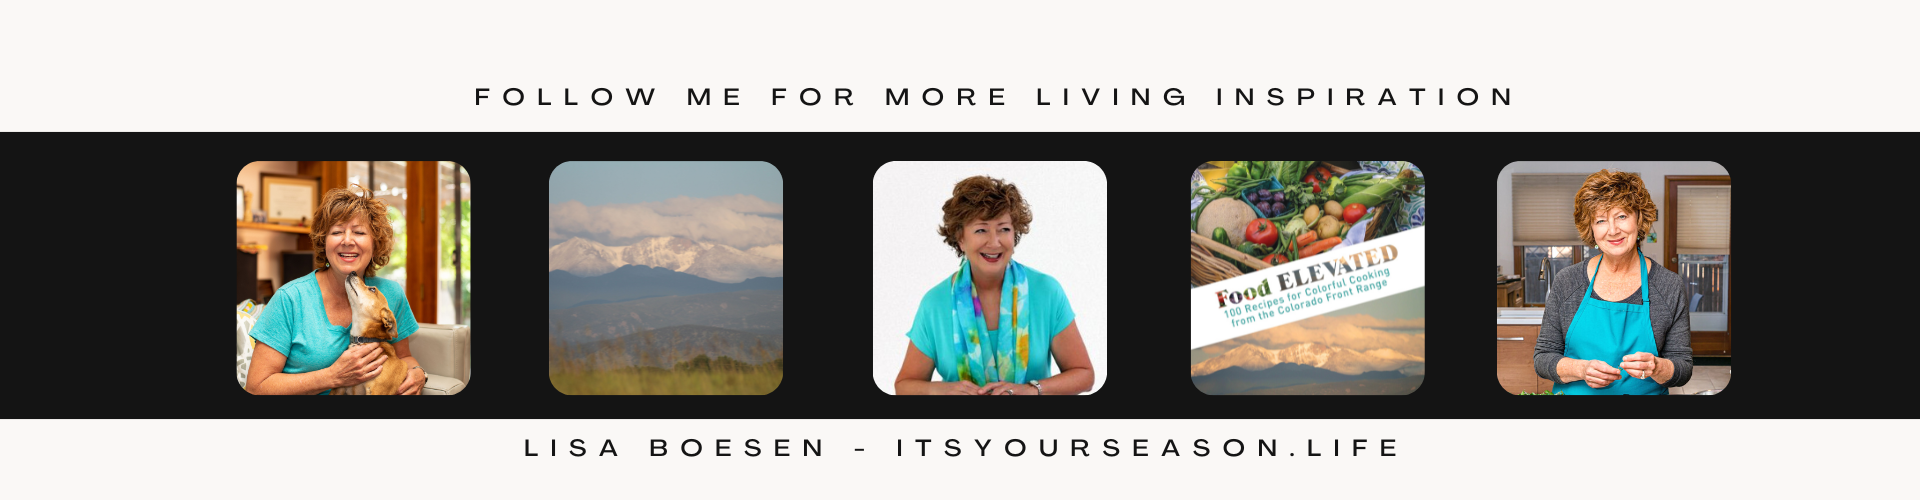 It’s Your Season.life! Eating Well and Living Well! - with Lisa Boesen